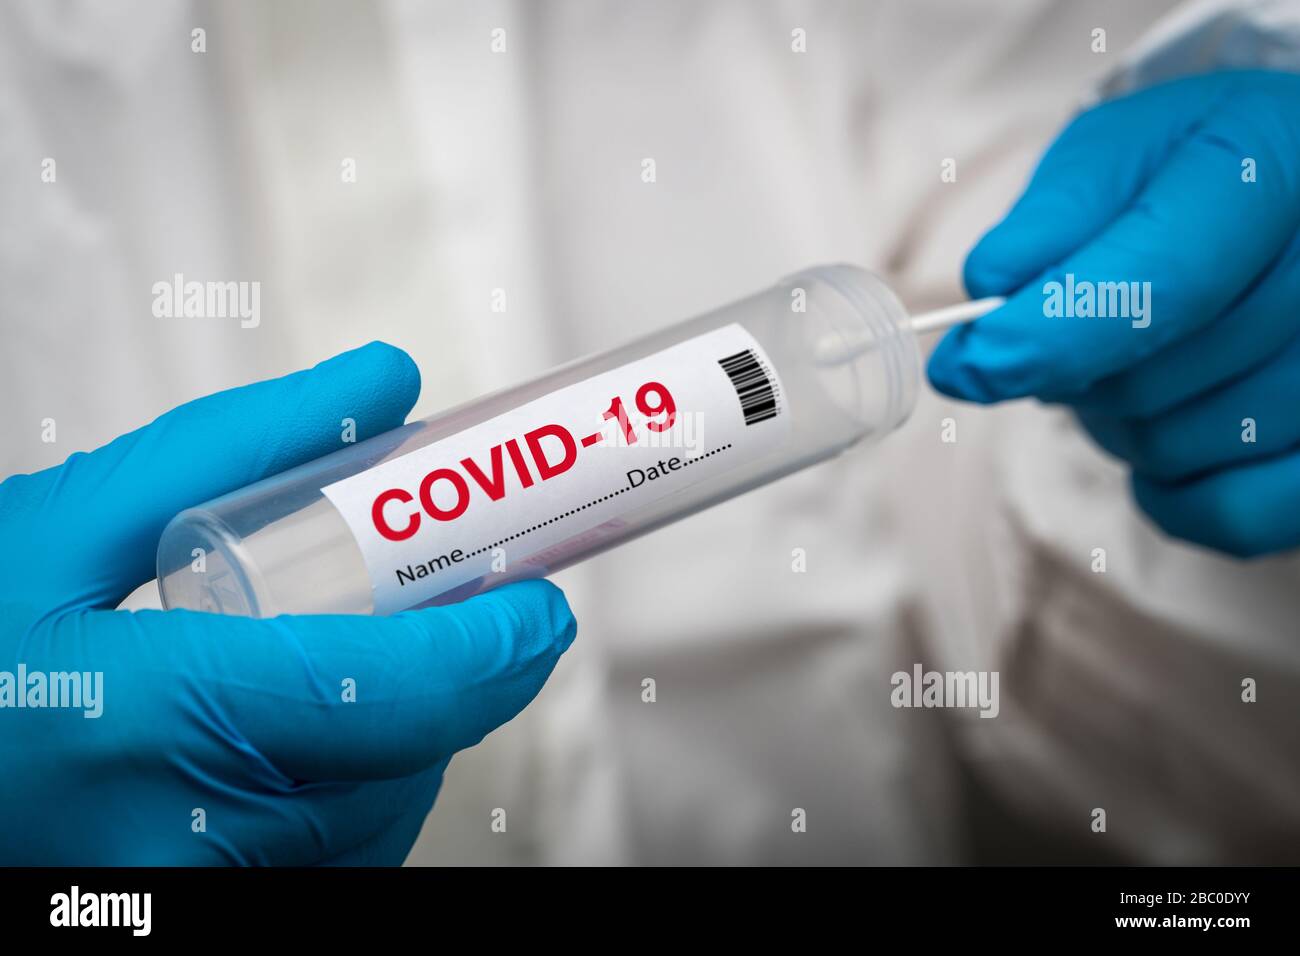 Covid-19-Abstrichtest. Stockfoto